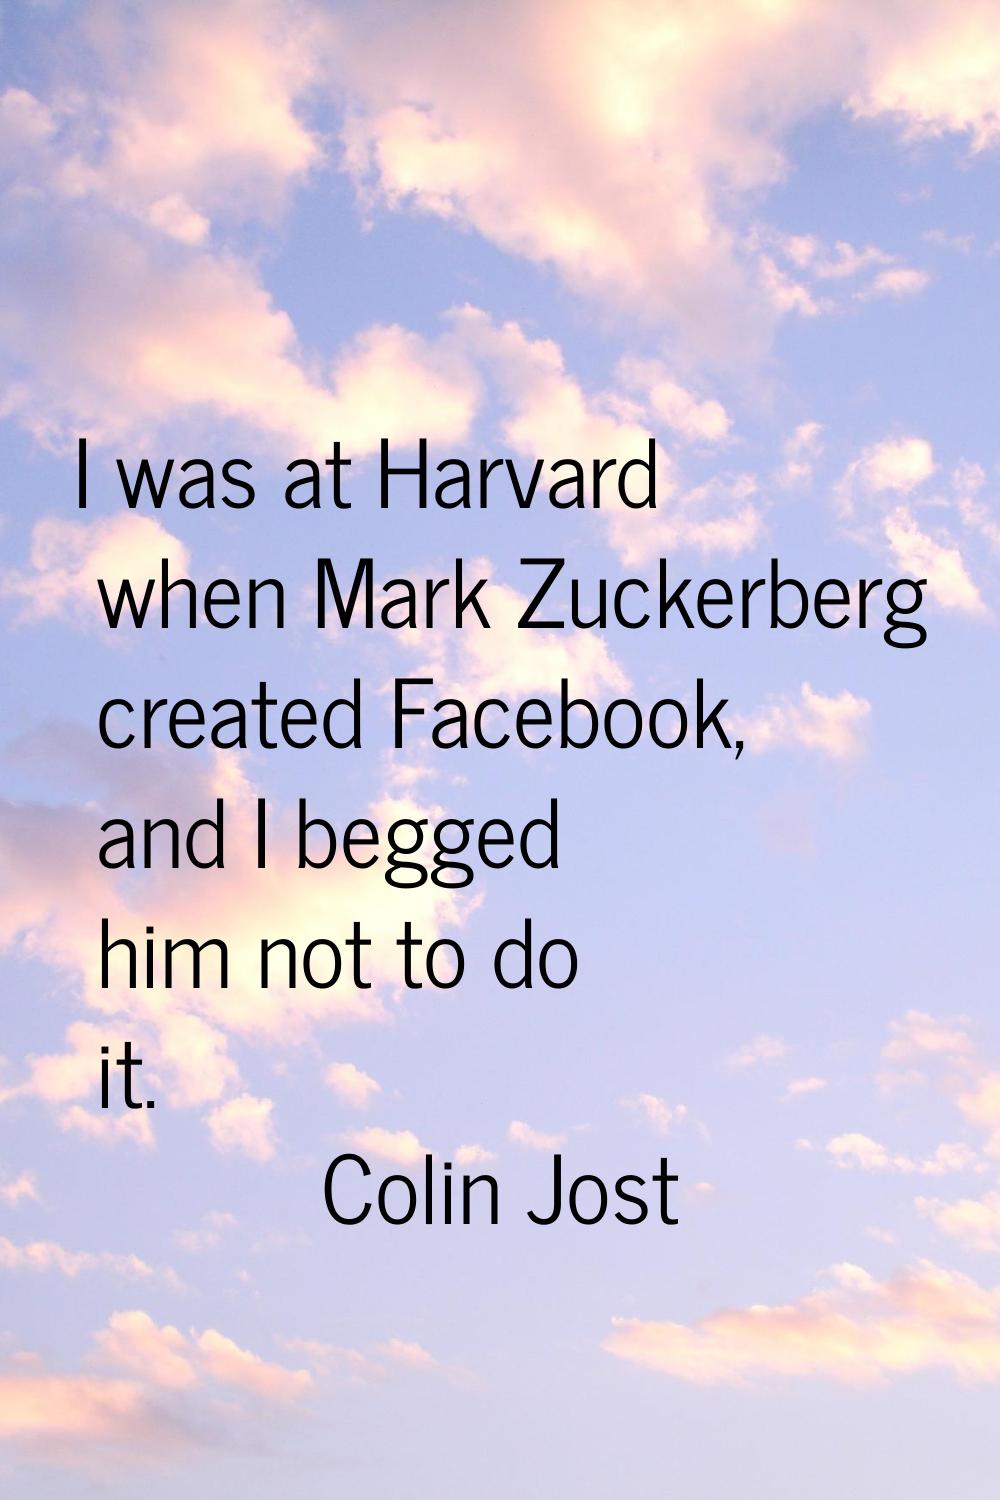 I was at Harvard when Mark Zuckerberg created Facebook, and I begged him not to do it.